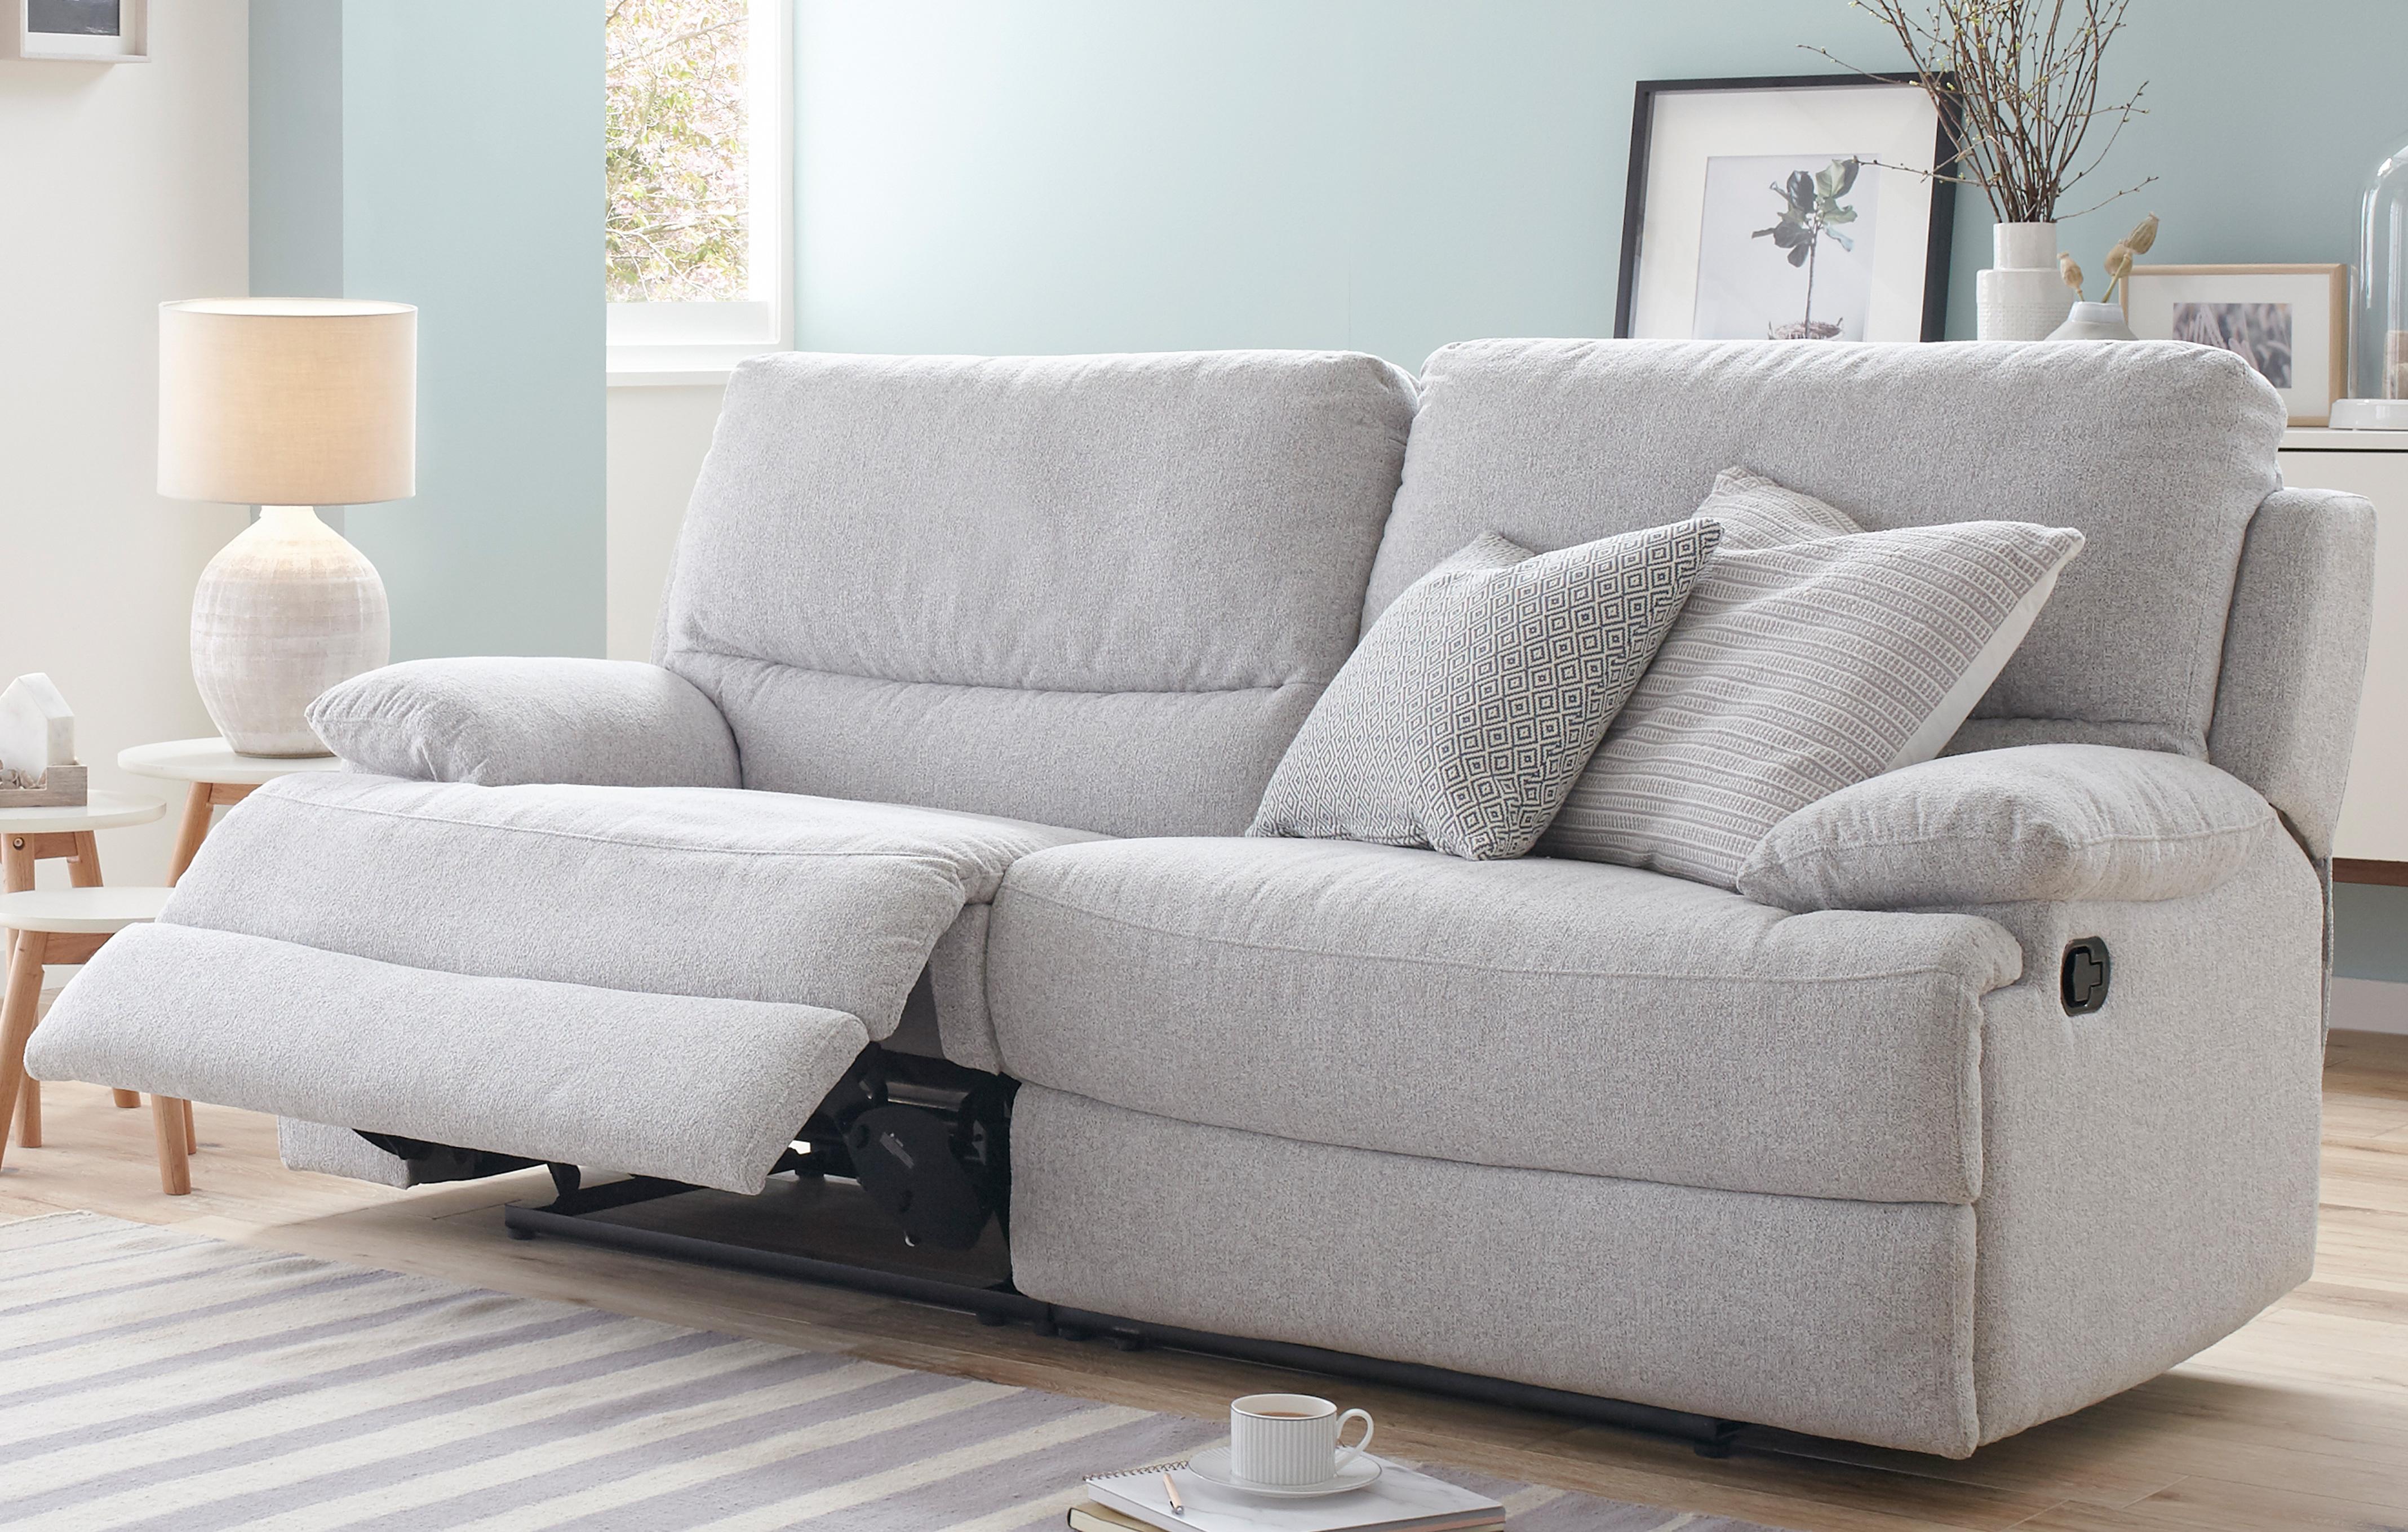 Fabric Recliner Sofas In A Range Of Styles | DFS